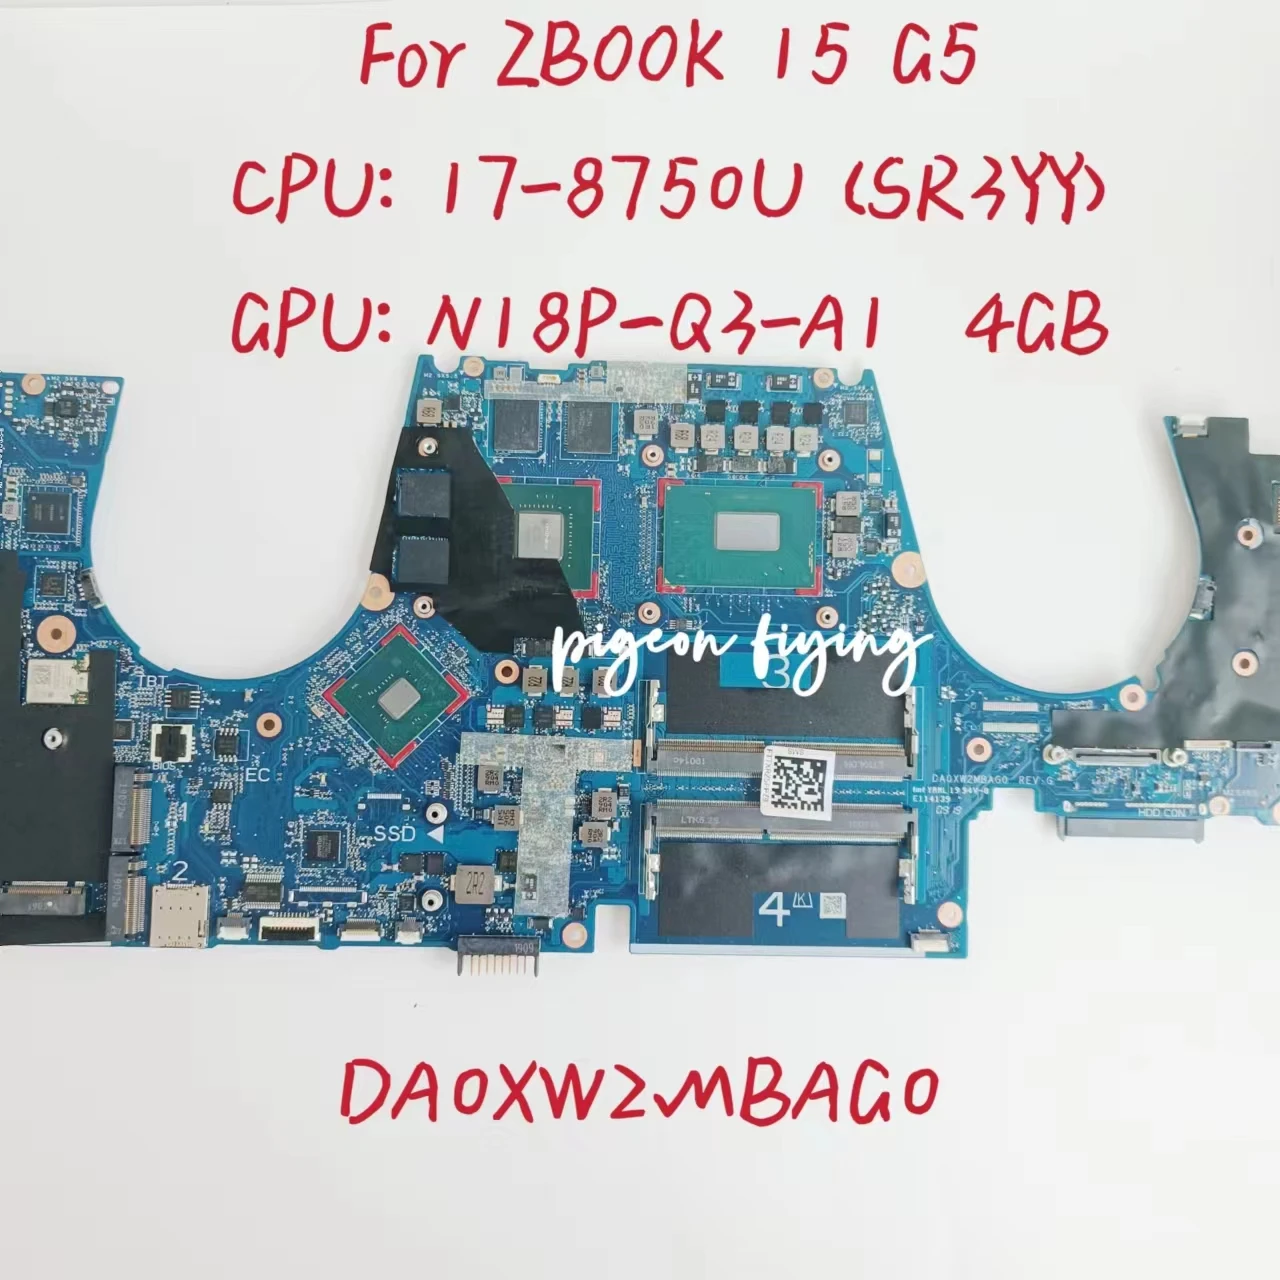 

DA0XW2MBAG0 Mainboard for HP ZBook 15 G5 Laptop Motherboard CPU:I7-8750H SR3YY GPU:N18P-Q3-A1 4GB DDR4 L28698-601 100% Test OK